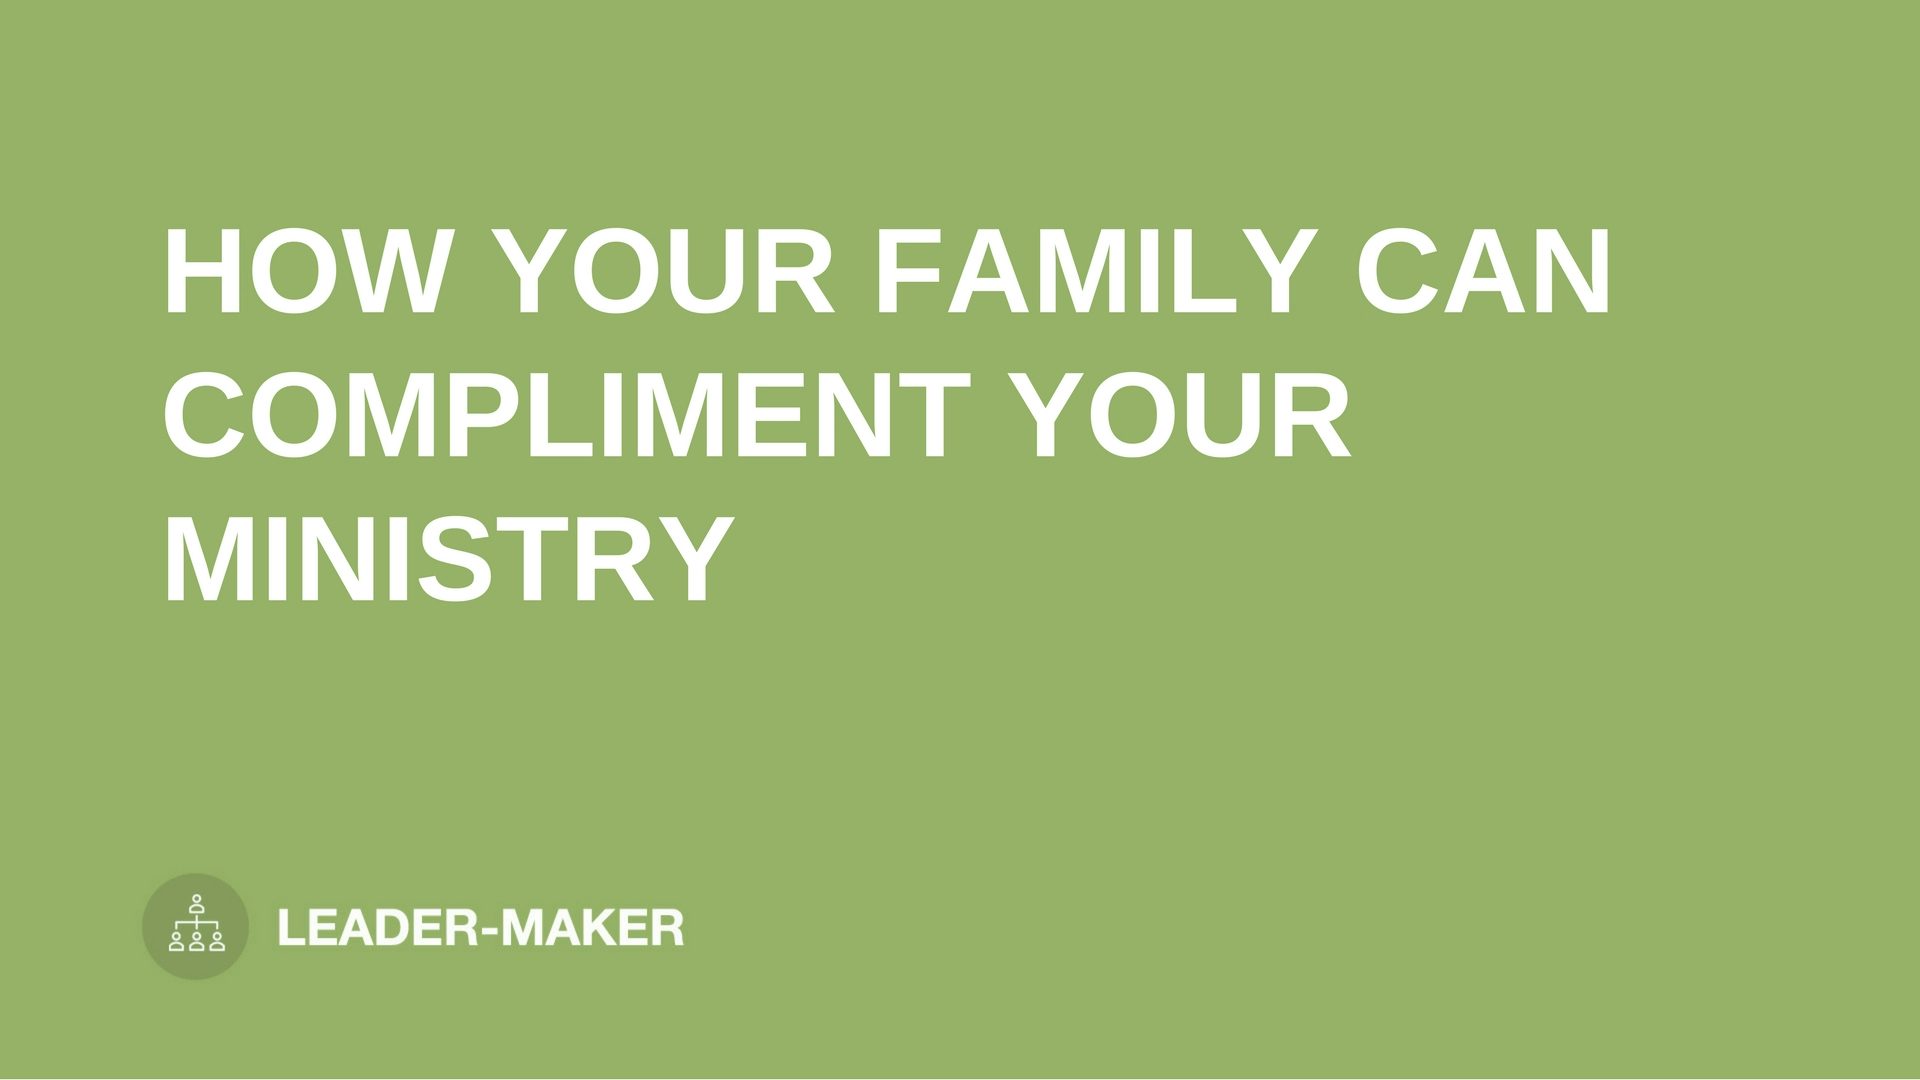 text "HOW YOUR FAMILY CAN COMPLIMENT YOUR MINISTRY" on green background leaders.church